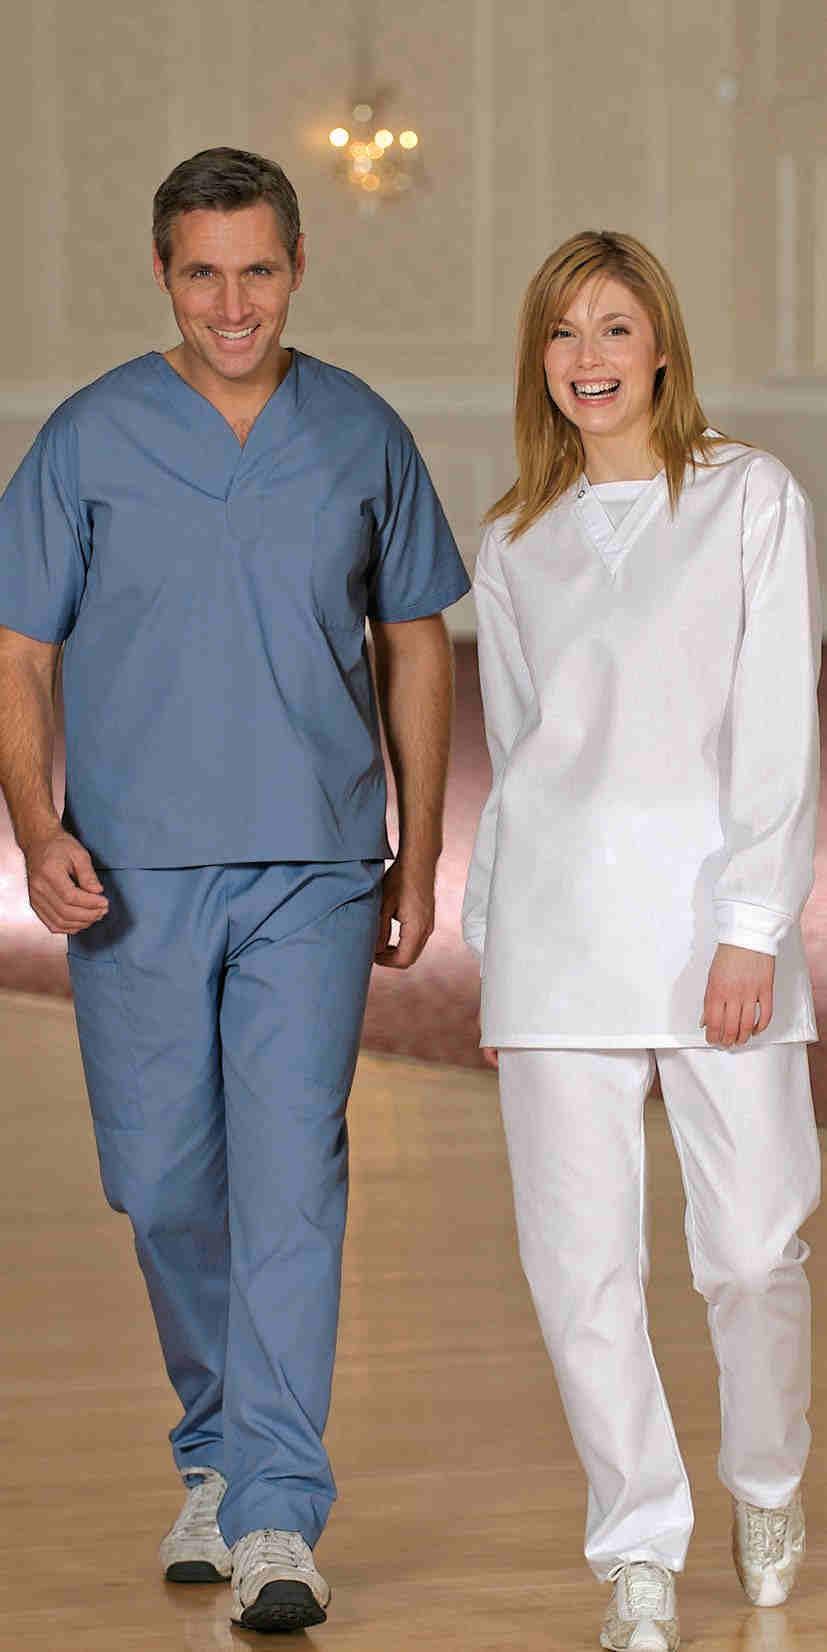 HEALTH CARE WEAR unisex scrub Top Designed for maximum function and comfort, it features a modesty front and convenient chest pocket. Sizes range from S-3XL. 65/35 Poly/Cotton blend in 4.5 oz.